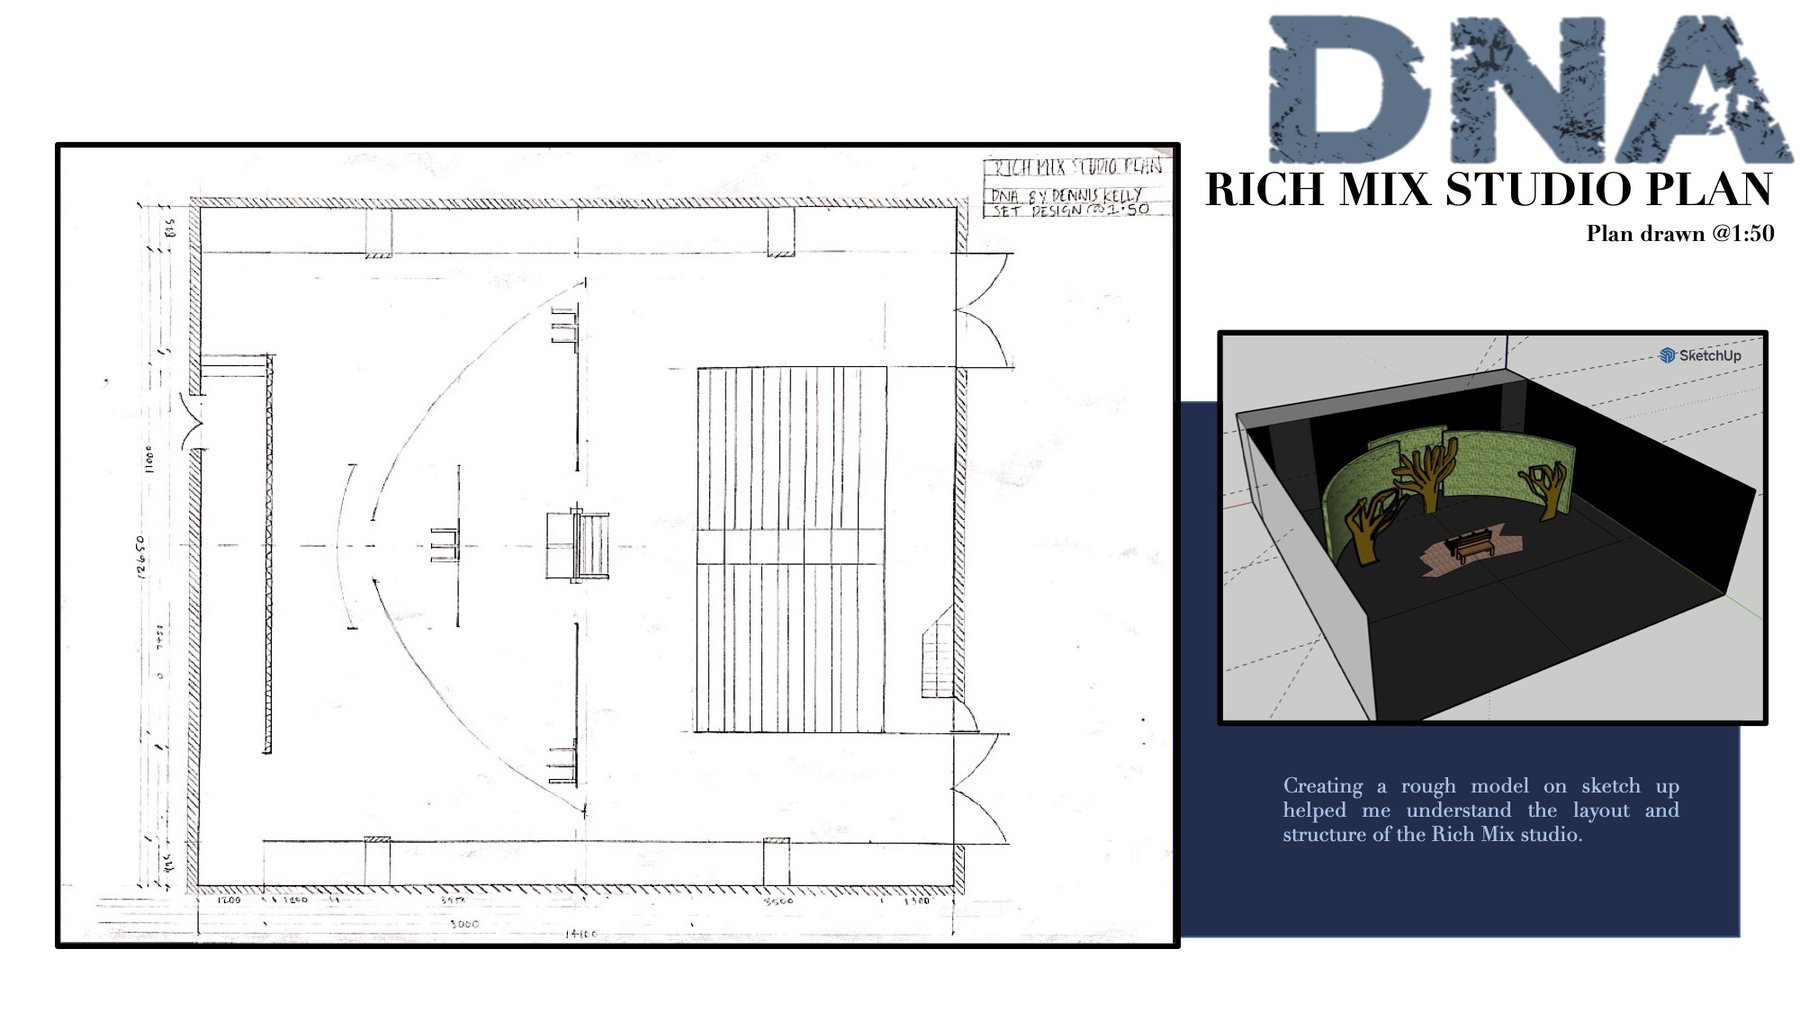 Technical drawing and rough model of the Rich Mix Studio plan